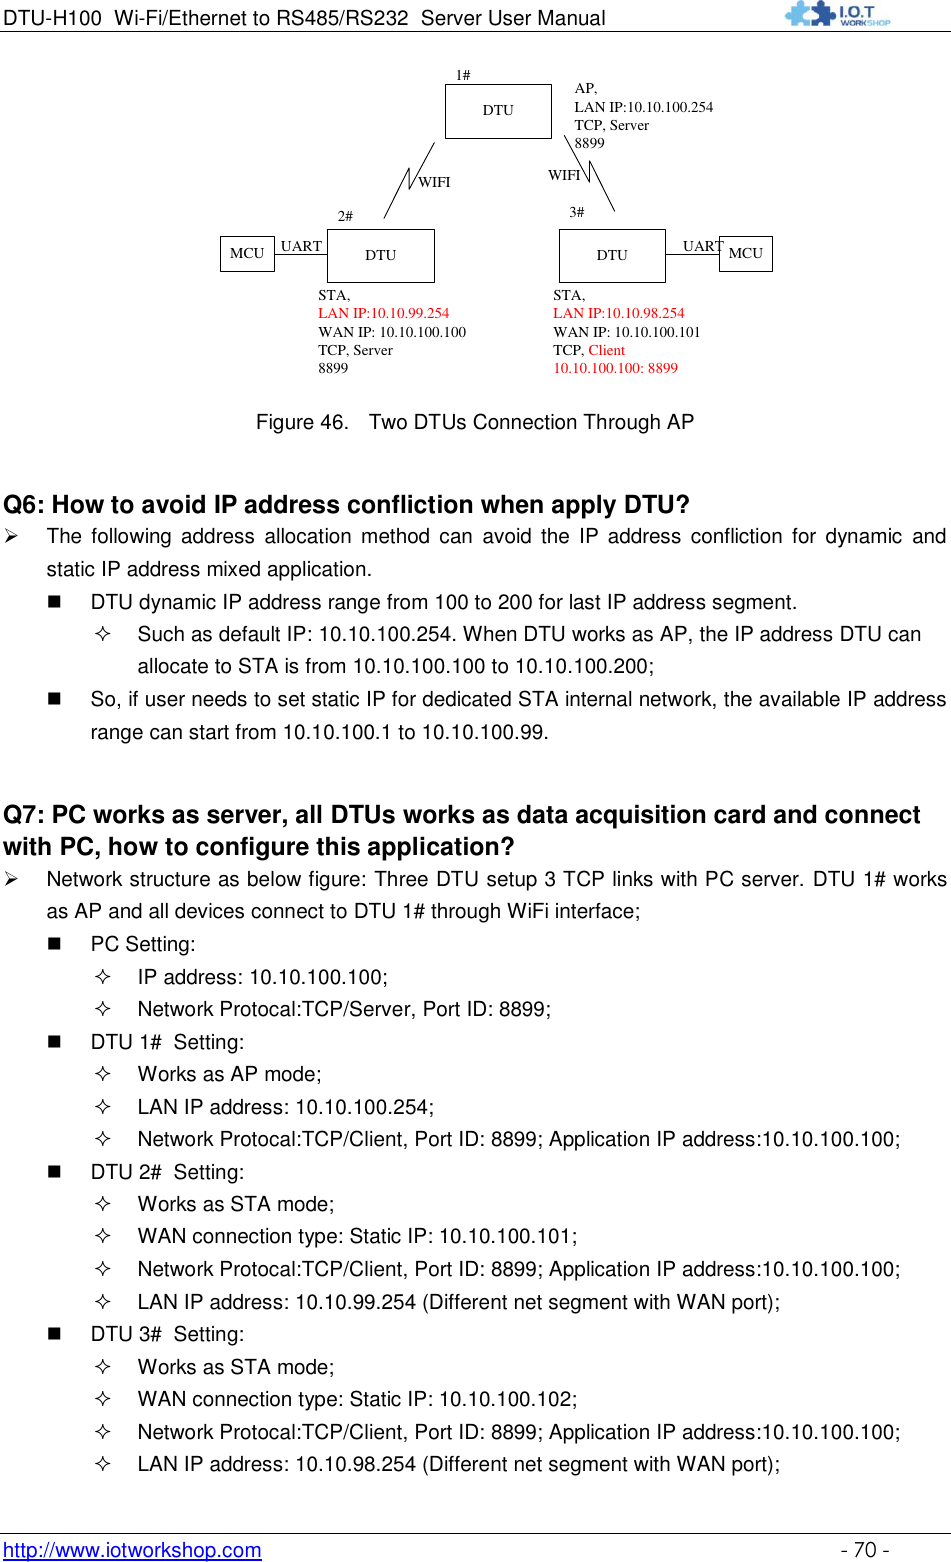 DTU-H100 Wi-Fi/Ethernet to RS485/RS232  Server User Manual    http://www.iotworkshop.com    - 70 - DTUAP, LAN IP:10.10.100.254TCP, Server8899DTUSTA, LAN IP:10.10.98.254WAN IP: 10.10.100.101TCP, Client10.10.100.100: 88992# 3#WIFIMCUMCU UARTUARTDTU1#WIFISTA, LAN IP:10.10.99.254WAN IP: 10.10.100.100TCP, Server8899 Figure 46. Two DTUs Connection Through AP Q6: How to avoid IP address confliction when apply DTU?  The  following  address  allocation  method  can  avoid  the  IP  address  confliction  for  dynamic  and static IP address mixed application.  DTU dynamic IP address range from 100 to 200 for last IP address segment.  Such as default IP: 10.10.100.254. When DTU works as AP, the IP address DTU can allocate to STA is from 10.10.100.100 to 10.10.100.200;  So, if user needs to set static IP for dedicated STA internal network, the available IP address range can start from 10.10.100.1 to 10.10.100.99. Q7: PC works as server, all DTUs works as data acquisition card and connect with PC, how to configure this application?  Network structure as below figure: Three DTU setup 3 TCP links with PC server. DTU 1# works as AP and all devices connect to DTU 1# through WiFi interface;  PC Setting:  IP address: 10.10.100.100;                      Network Protocal:TCP/Server, Port ID: 8899;  DTU 1#  Setting:  Works as AP mode;                                        LAN IP address: 10.10.100.254;                      Network Protocal:TCP/Client, Port ID: 8899; Application IP address:10.10.100.100;  DTU 2#  Setting:  Works as STA mode;                                            WAN connection type: Static IP: 10.10.100.101;                                                                Network Protocal:TCP/Client, Port ID: 8899; Application IP address:10.10.100.100;  LAN IP address: 10.10.99.254 (Different net segment with WAN port);  DTU 3#  Setting:  Works as STA mode;                                            WAN connection type: Static IP: 10.10.100.102;                                                                Network Protocal:TCP/Client, Port ID: 8899; Application IP address:10.10.100.100;  LAN IP address: 10.10.98.254 (Different net segment with WAN port); 